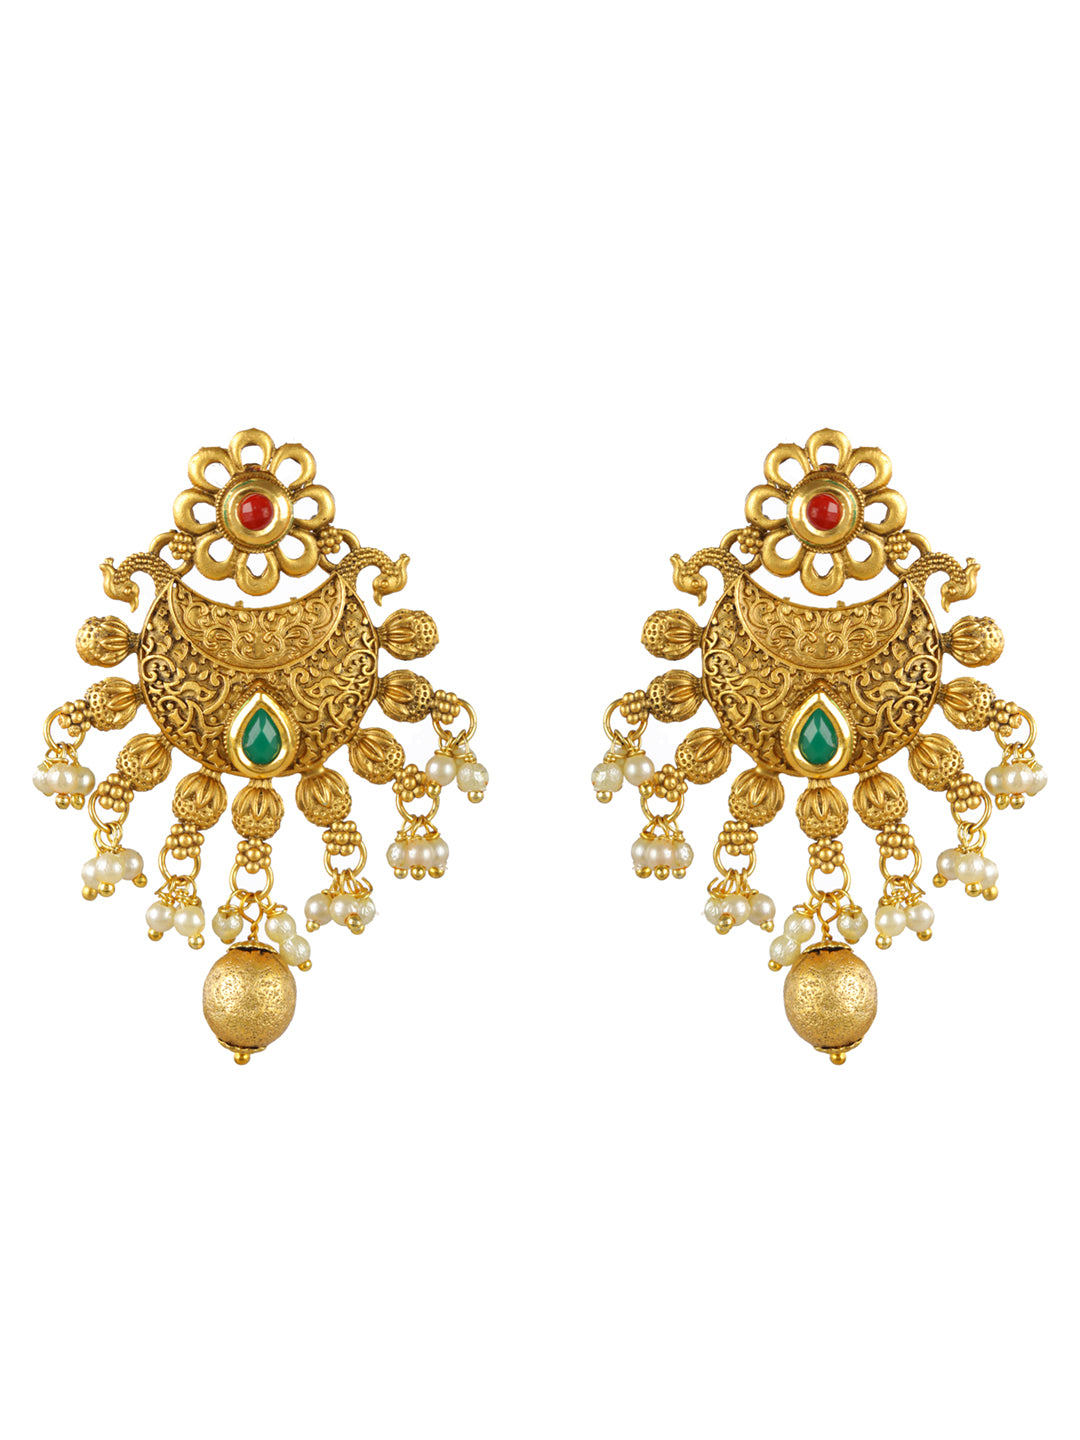 Priyaasi Studded Green Floral Multilayer Gold-Plated Jewellery Set